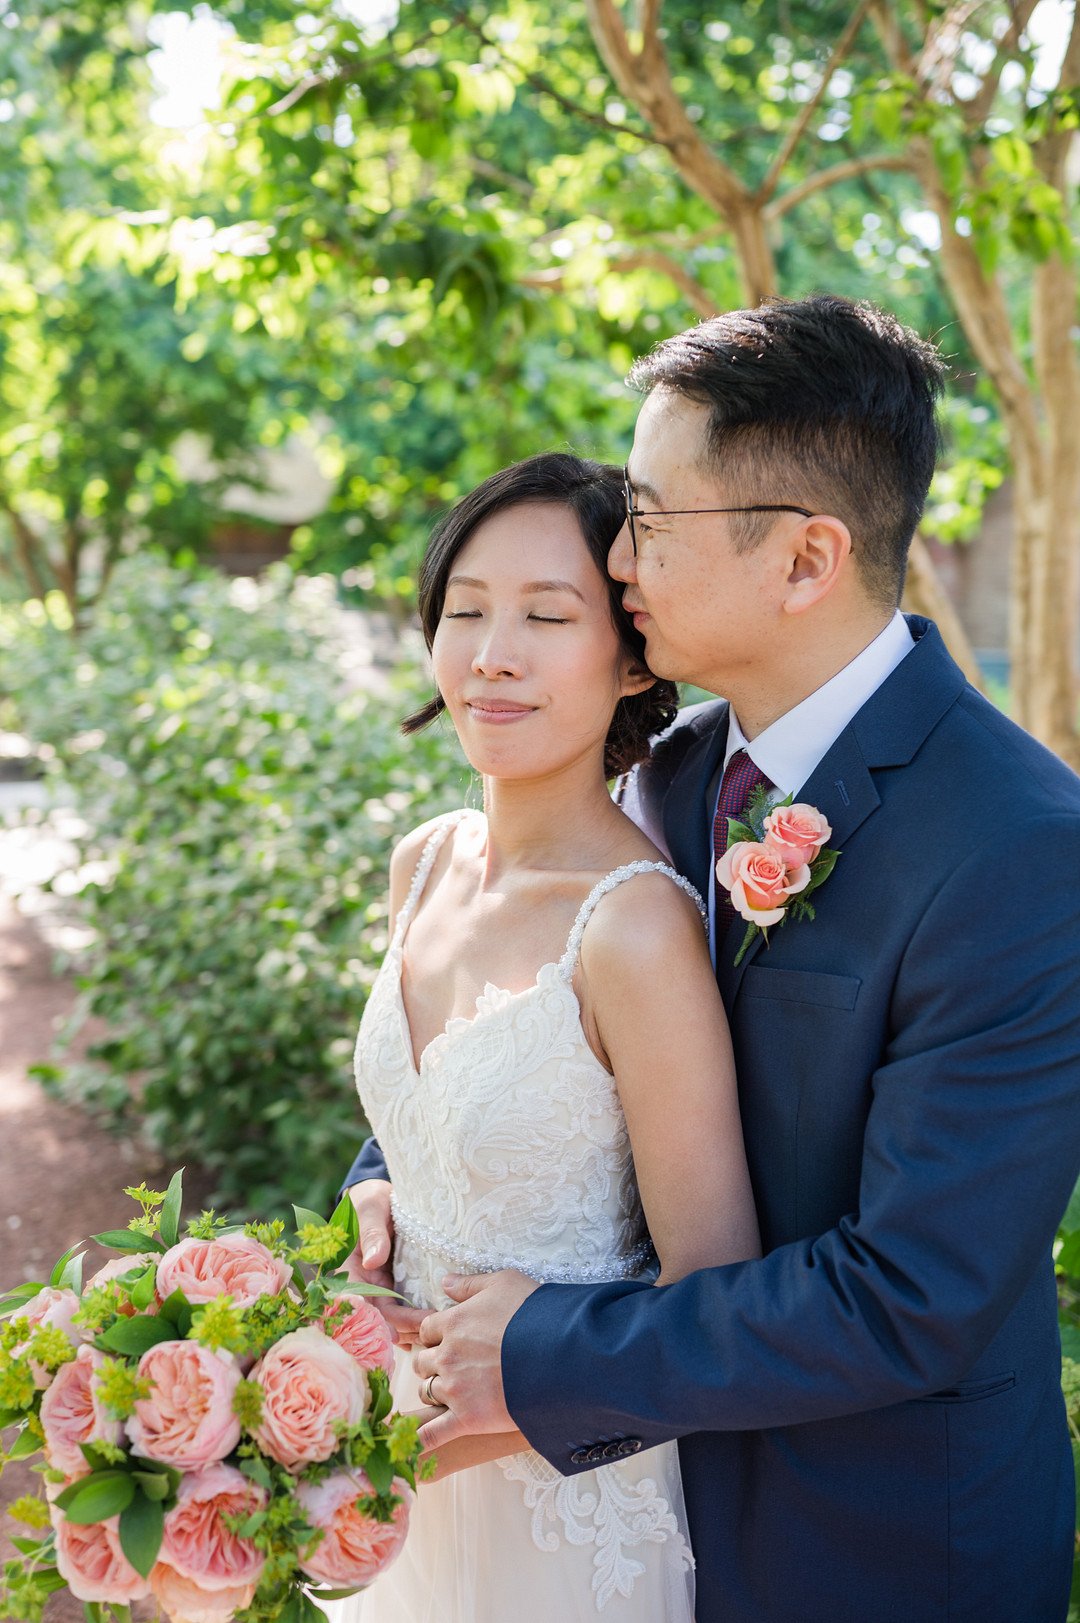 Chan_Chan_Winterlyn Photography_GLESSNER HOUSE CHICAGO WEDDING-69_low.jpg